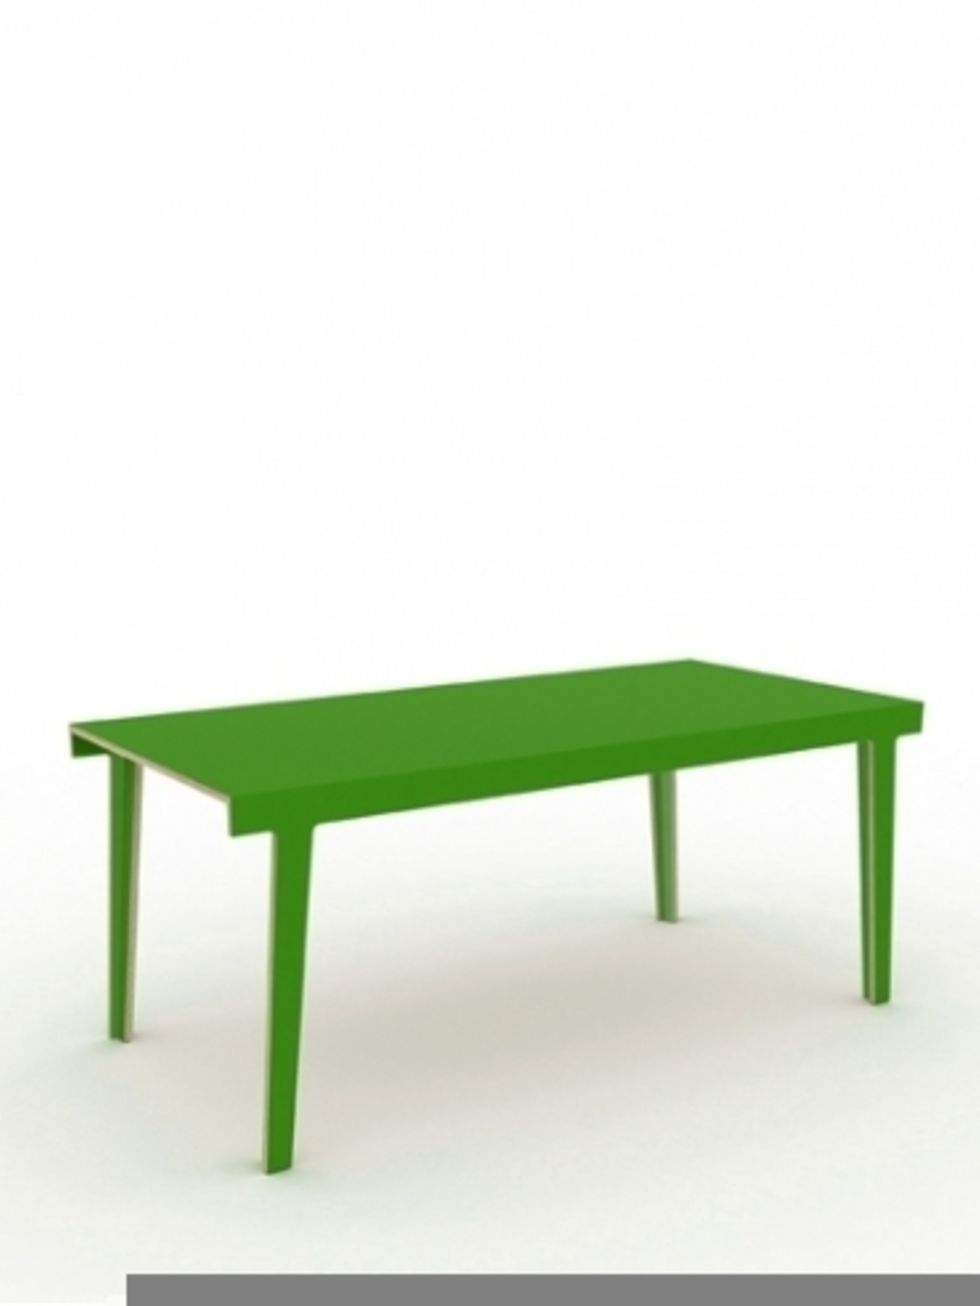 Wood, Green, Furniture, Line, Teal, Outdoor furniture, Rectangle, Turquoise, Aqua, Parallel, 